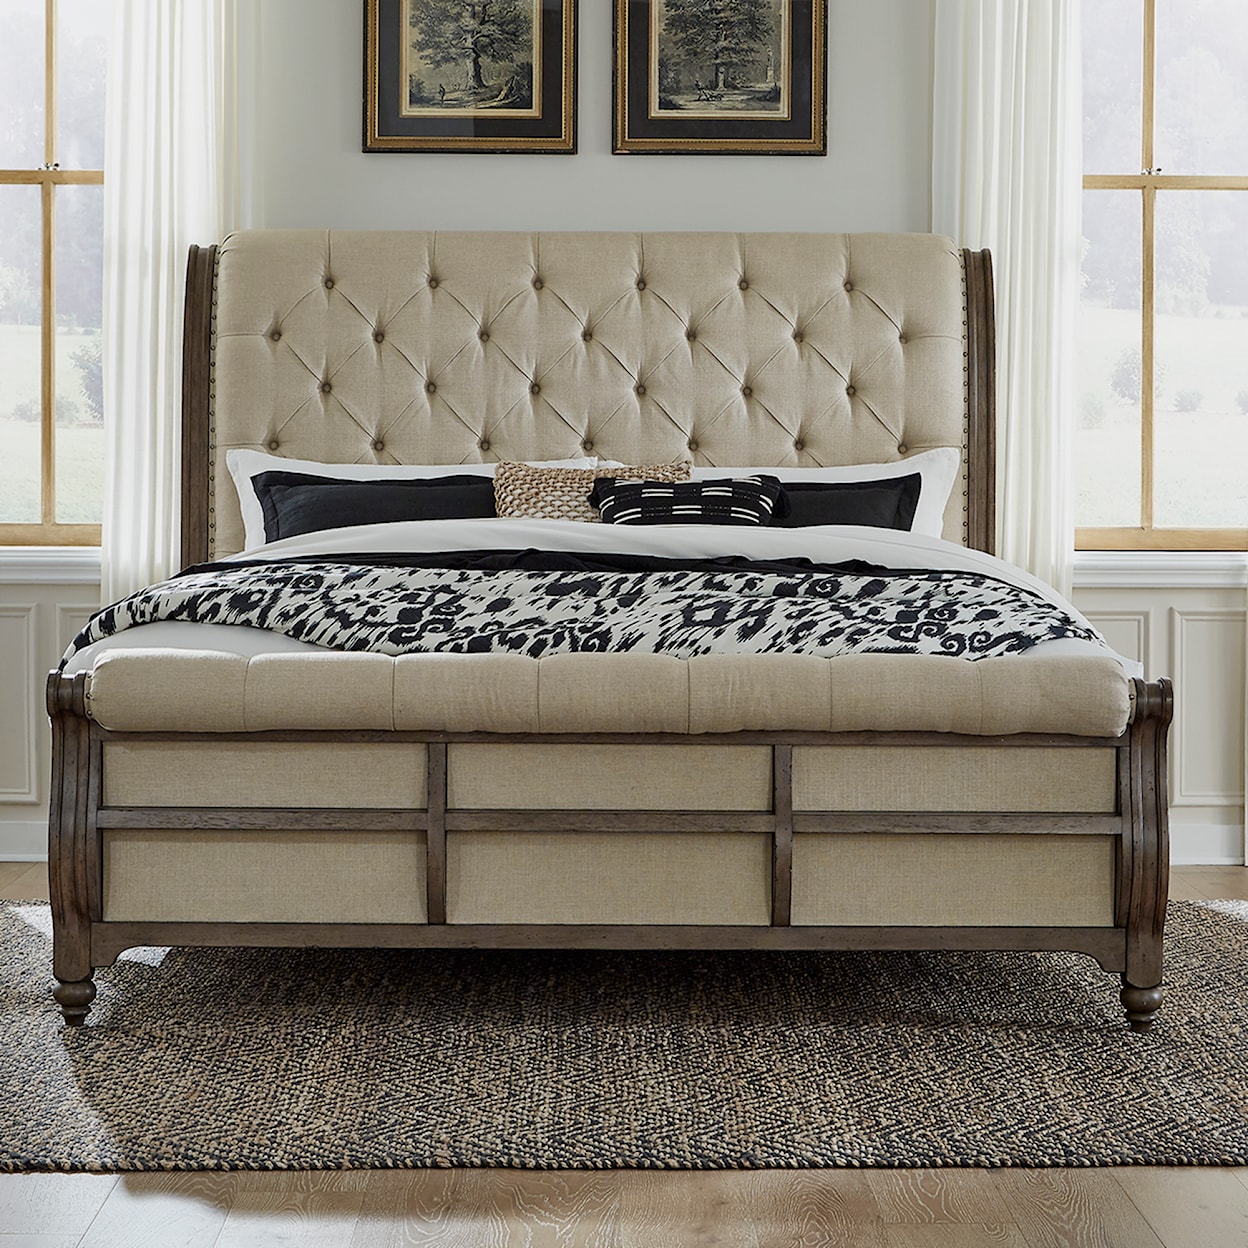 Liberty Furniture Americana Farmhouse Upholstered Queen Sleigh Bed